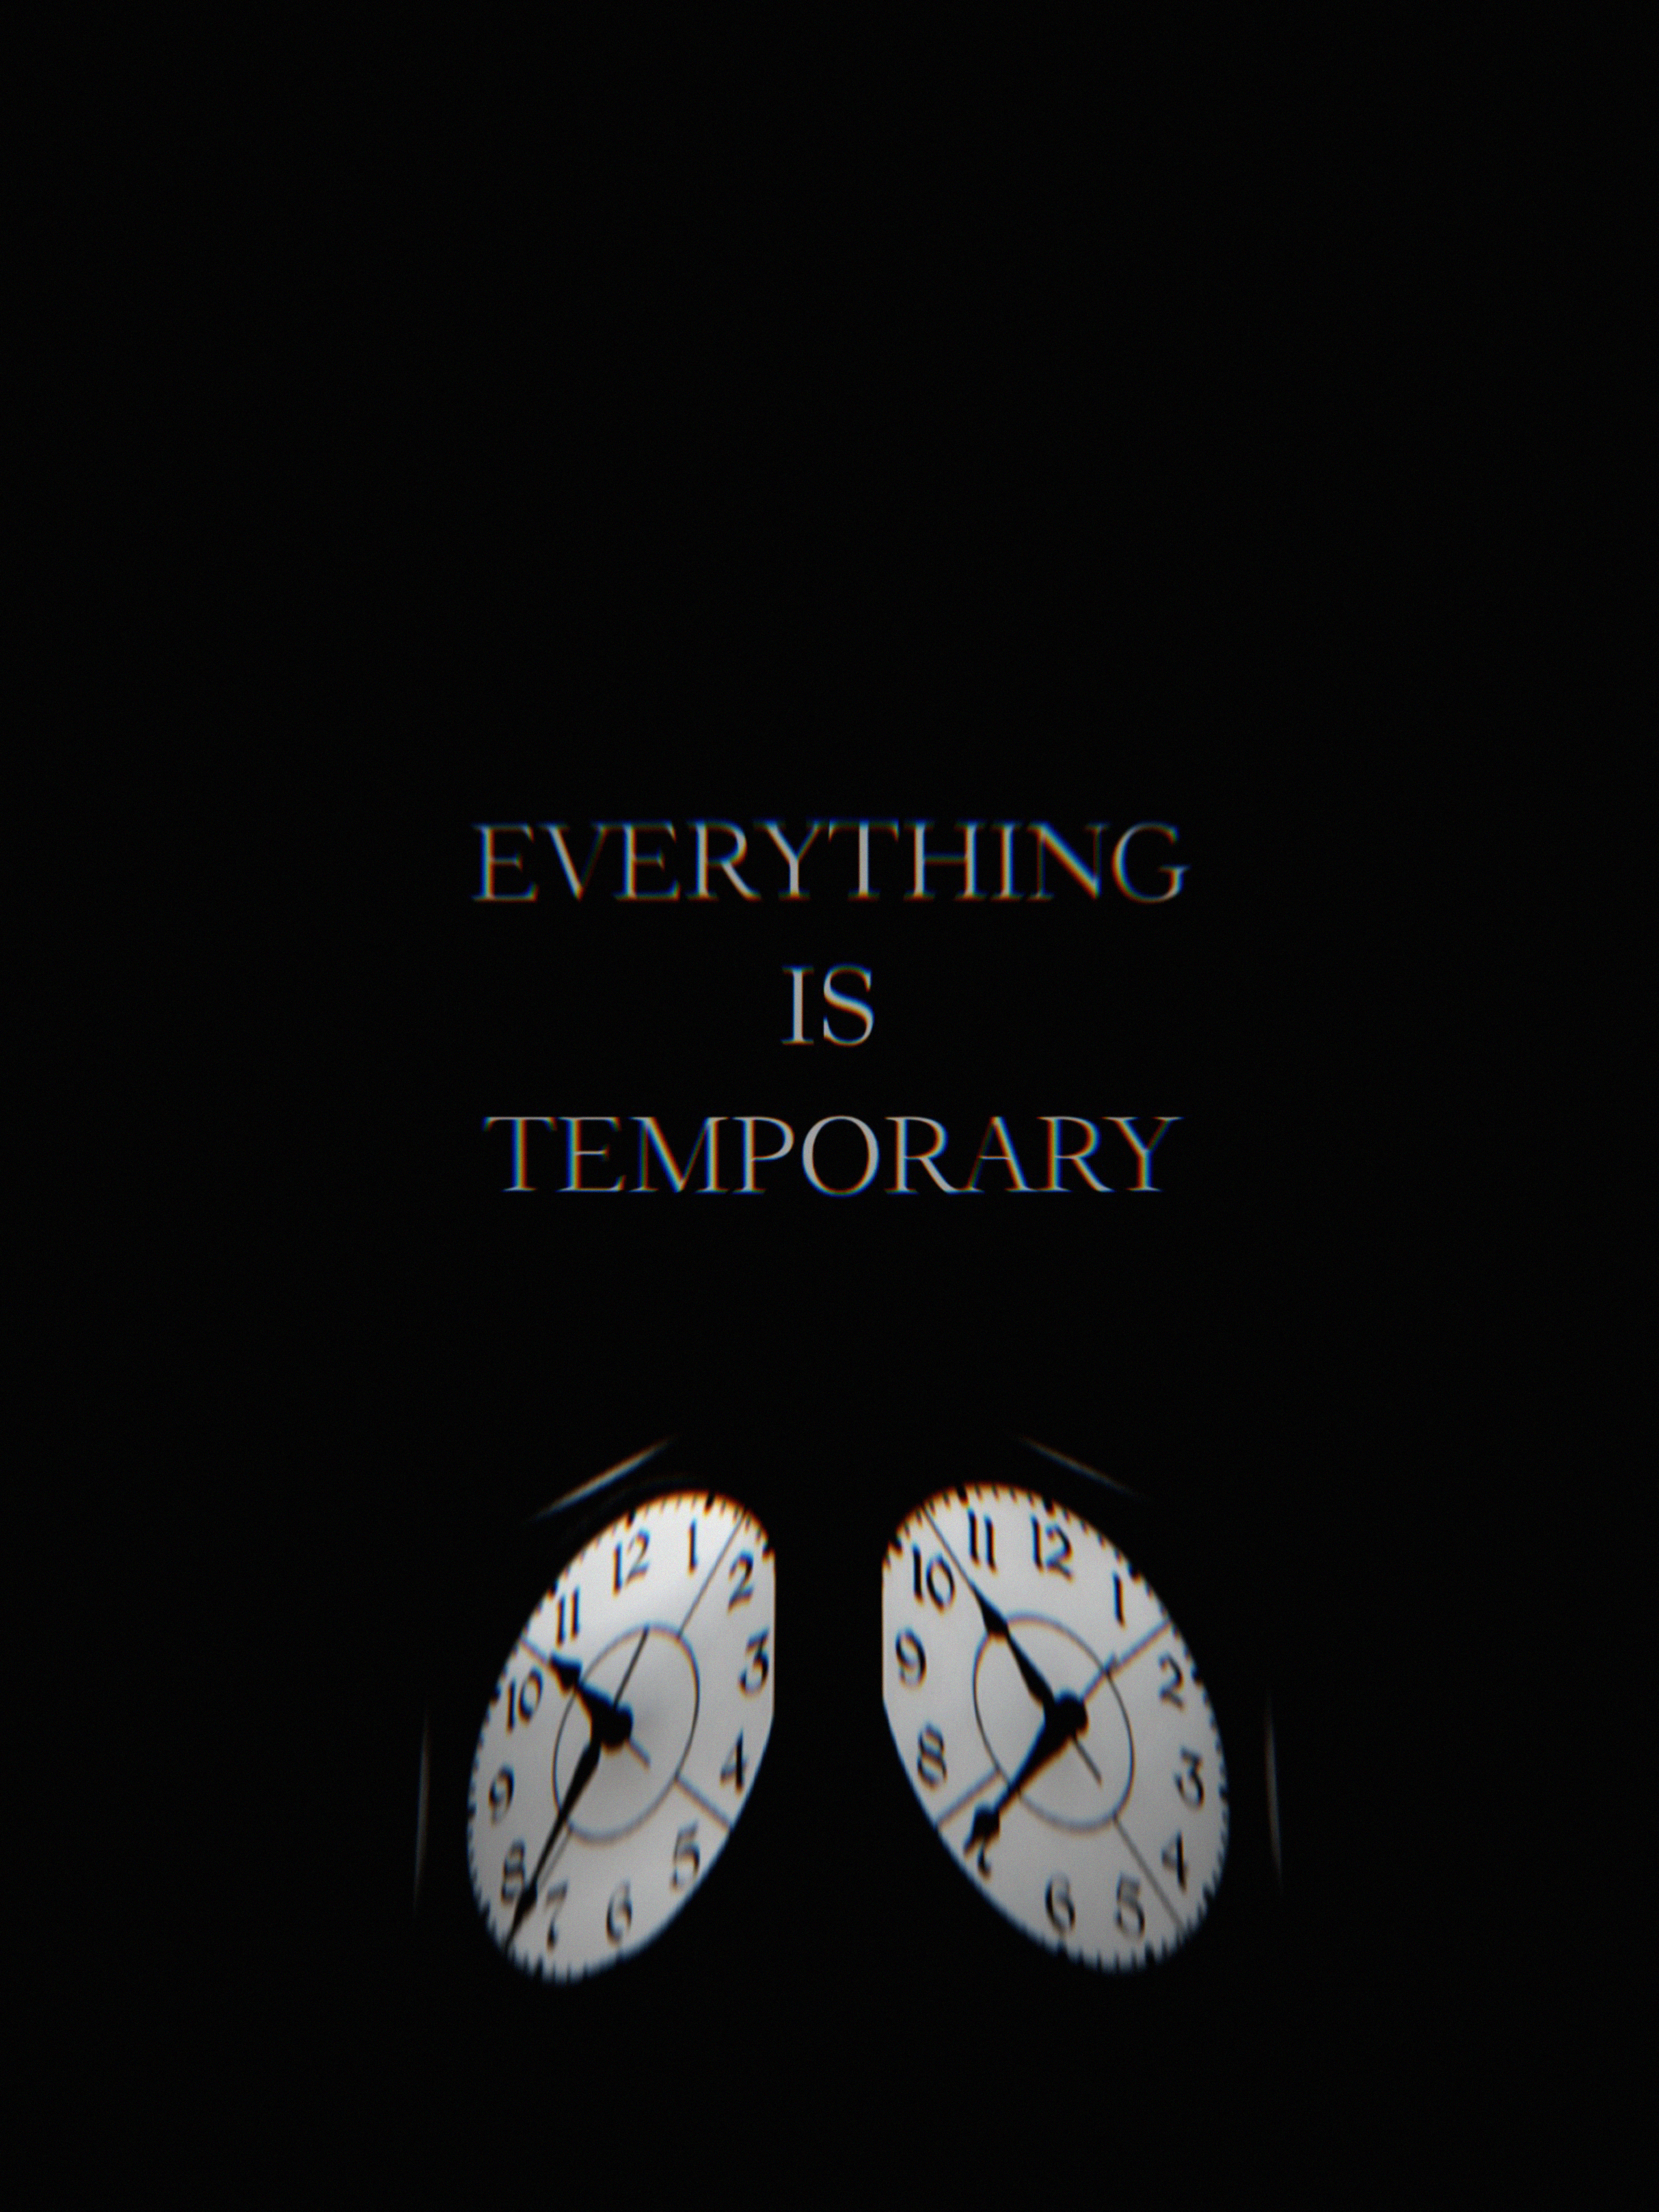 life, clock, words, glitch, time, it's time, temporary wallpaper for mobile